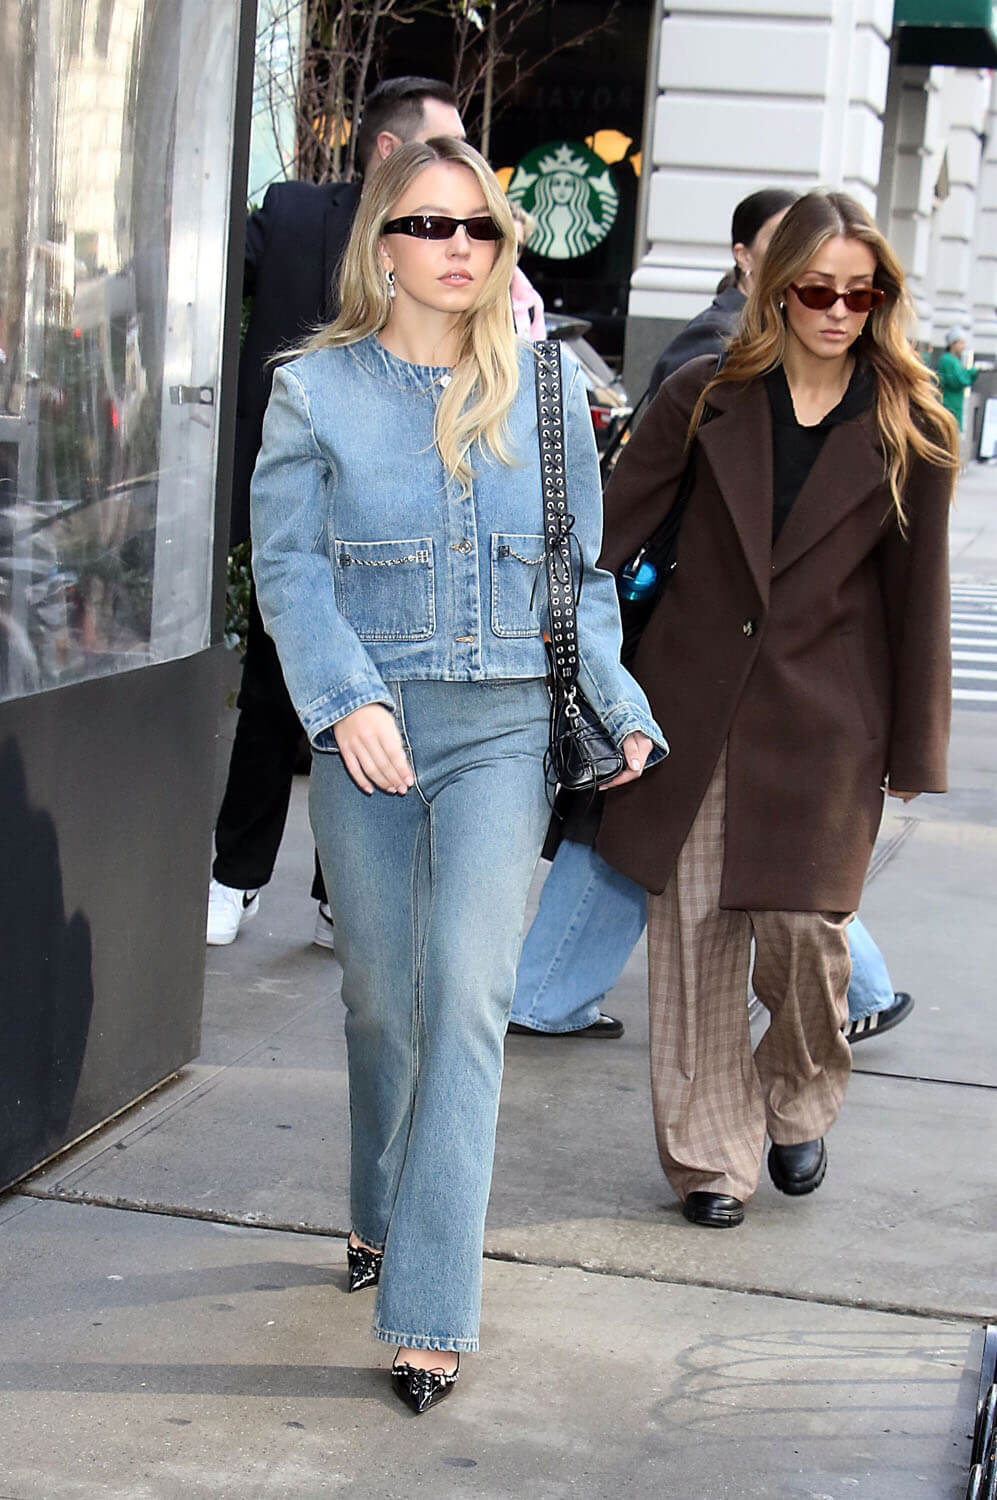 Sydney Sweeney oozes confidence as she strolls through New York City in a  double denim look ahead of her hosting SNL